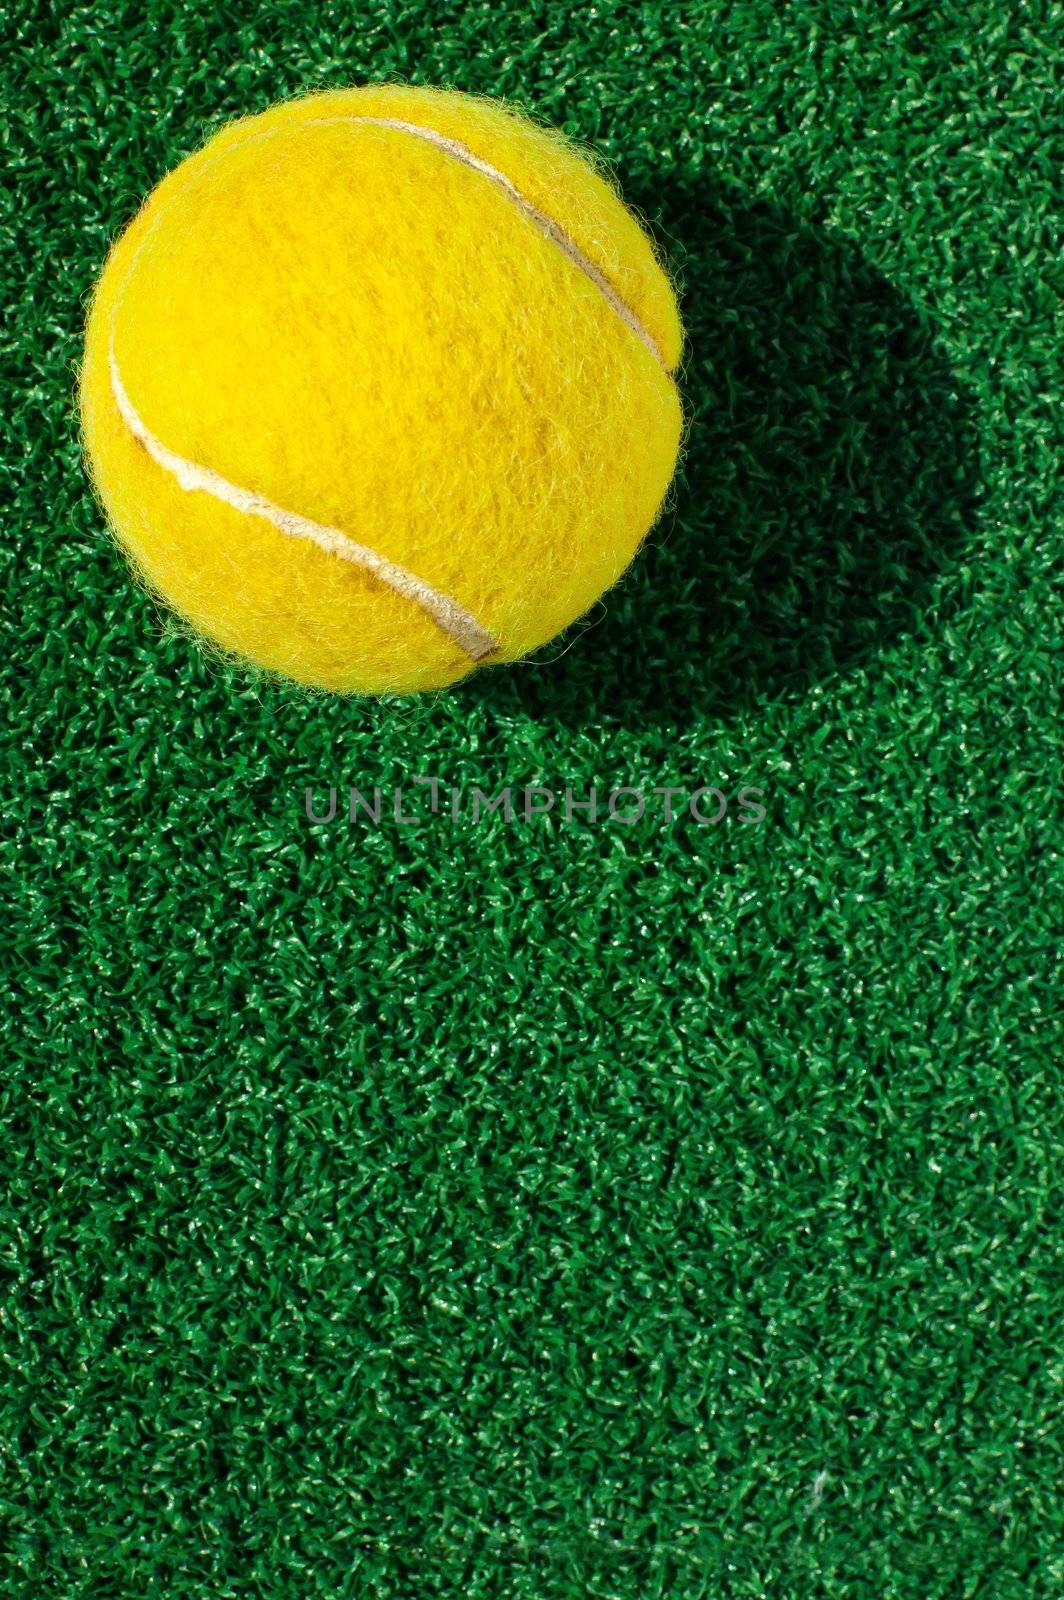 tennis ball on grass by ponsulak